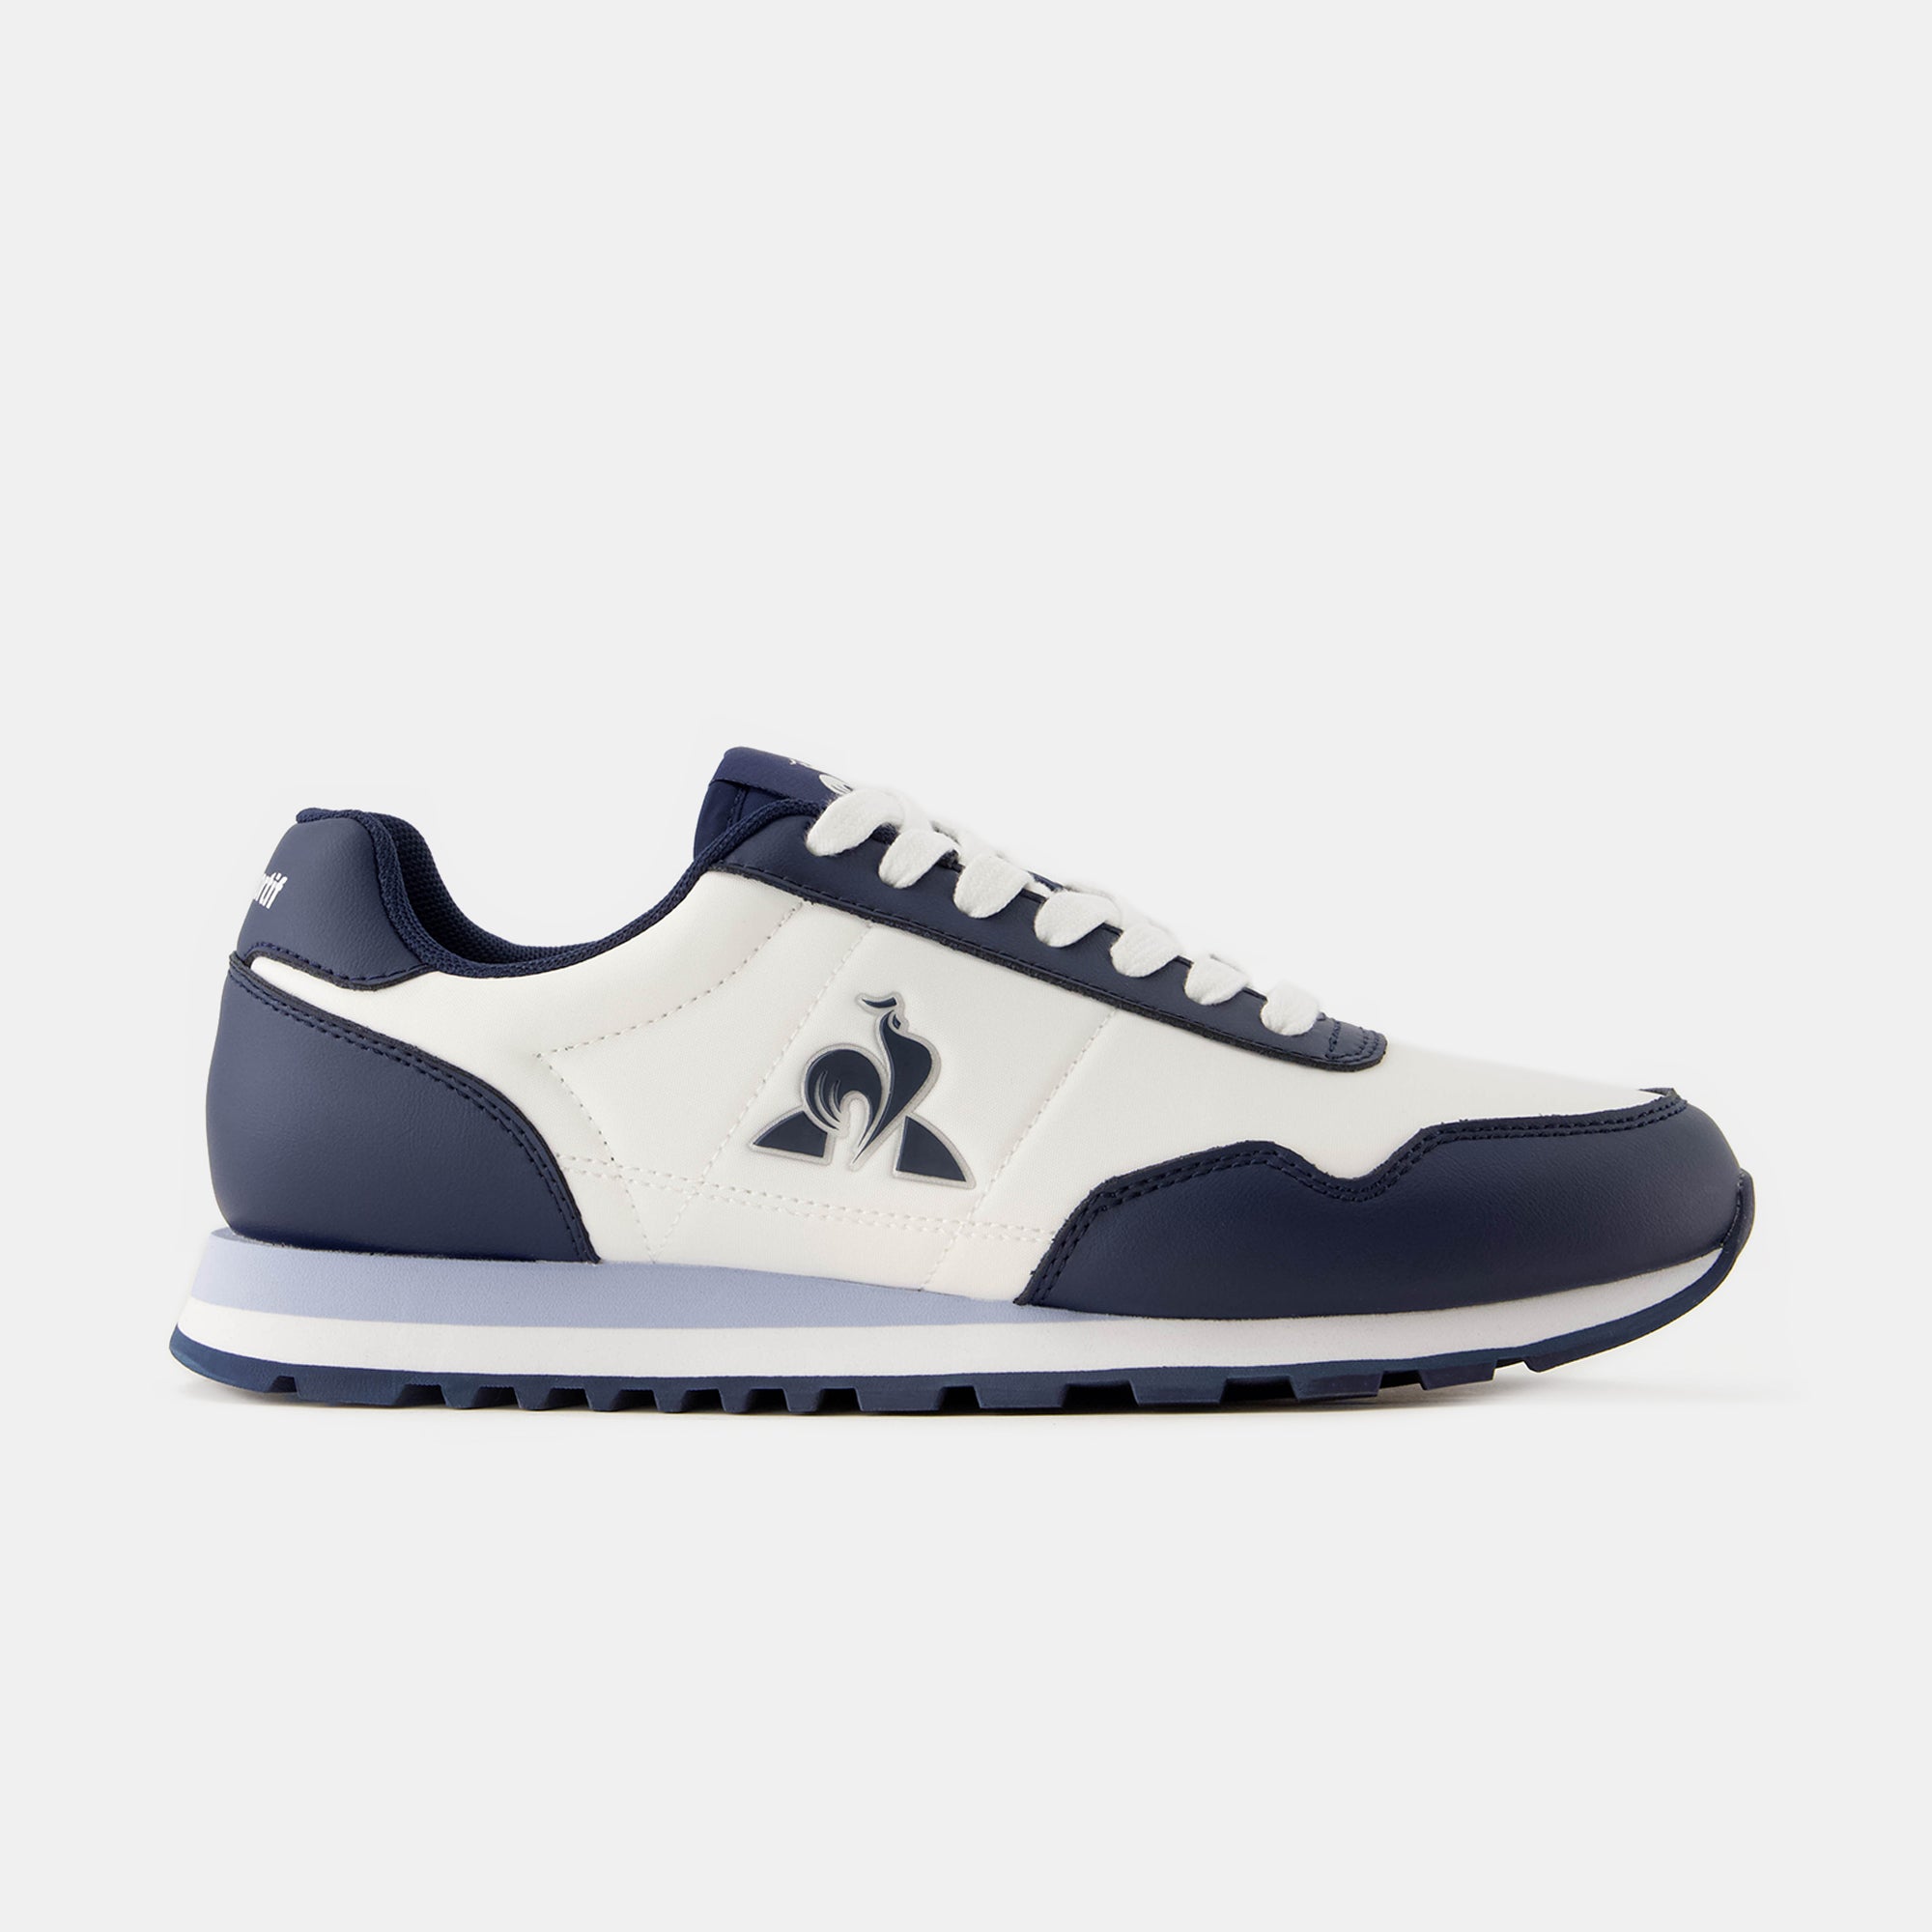 2423235-ASTRA_2 optical white/dress blue | Chaussures ASTRA_2 Unisexe